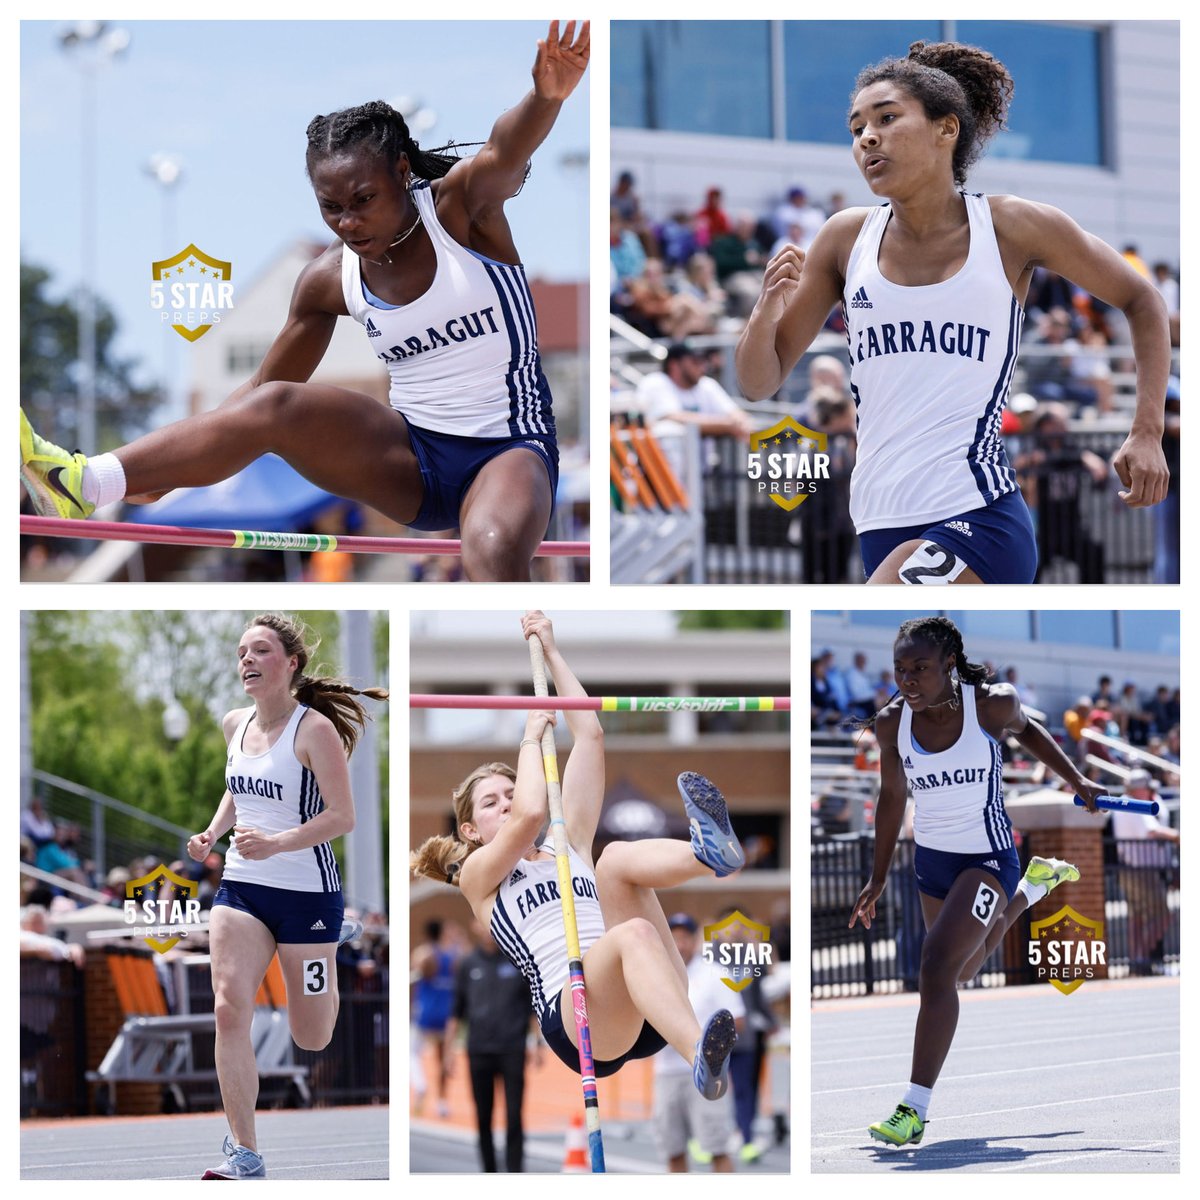 Another terrific weekend for the Lady Admirals Track & Field Team! 11th overall in a field of 3 dozen of the top teams in Tennessee & the nation at the Volunteer Classic at UT! ⚓️🏃‍♀️🍊 Awesome Photos by ⁦@TheDannyParker⁩ of ⁦@5StarPreps⁩ ____ ⁦@AdmiralsXC_TF⁩